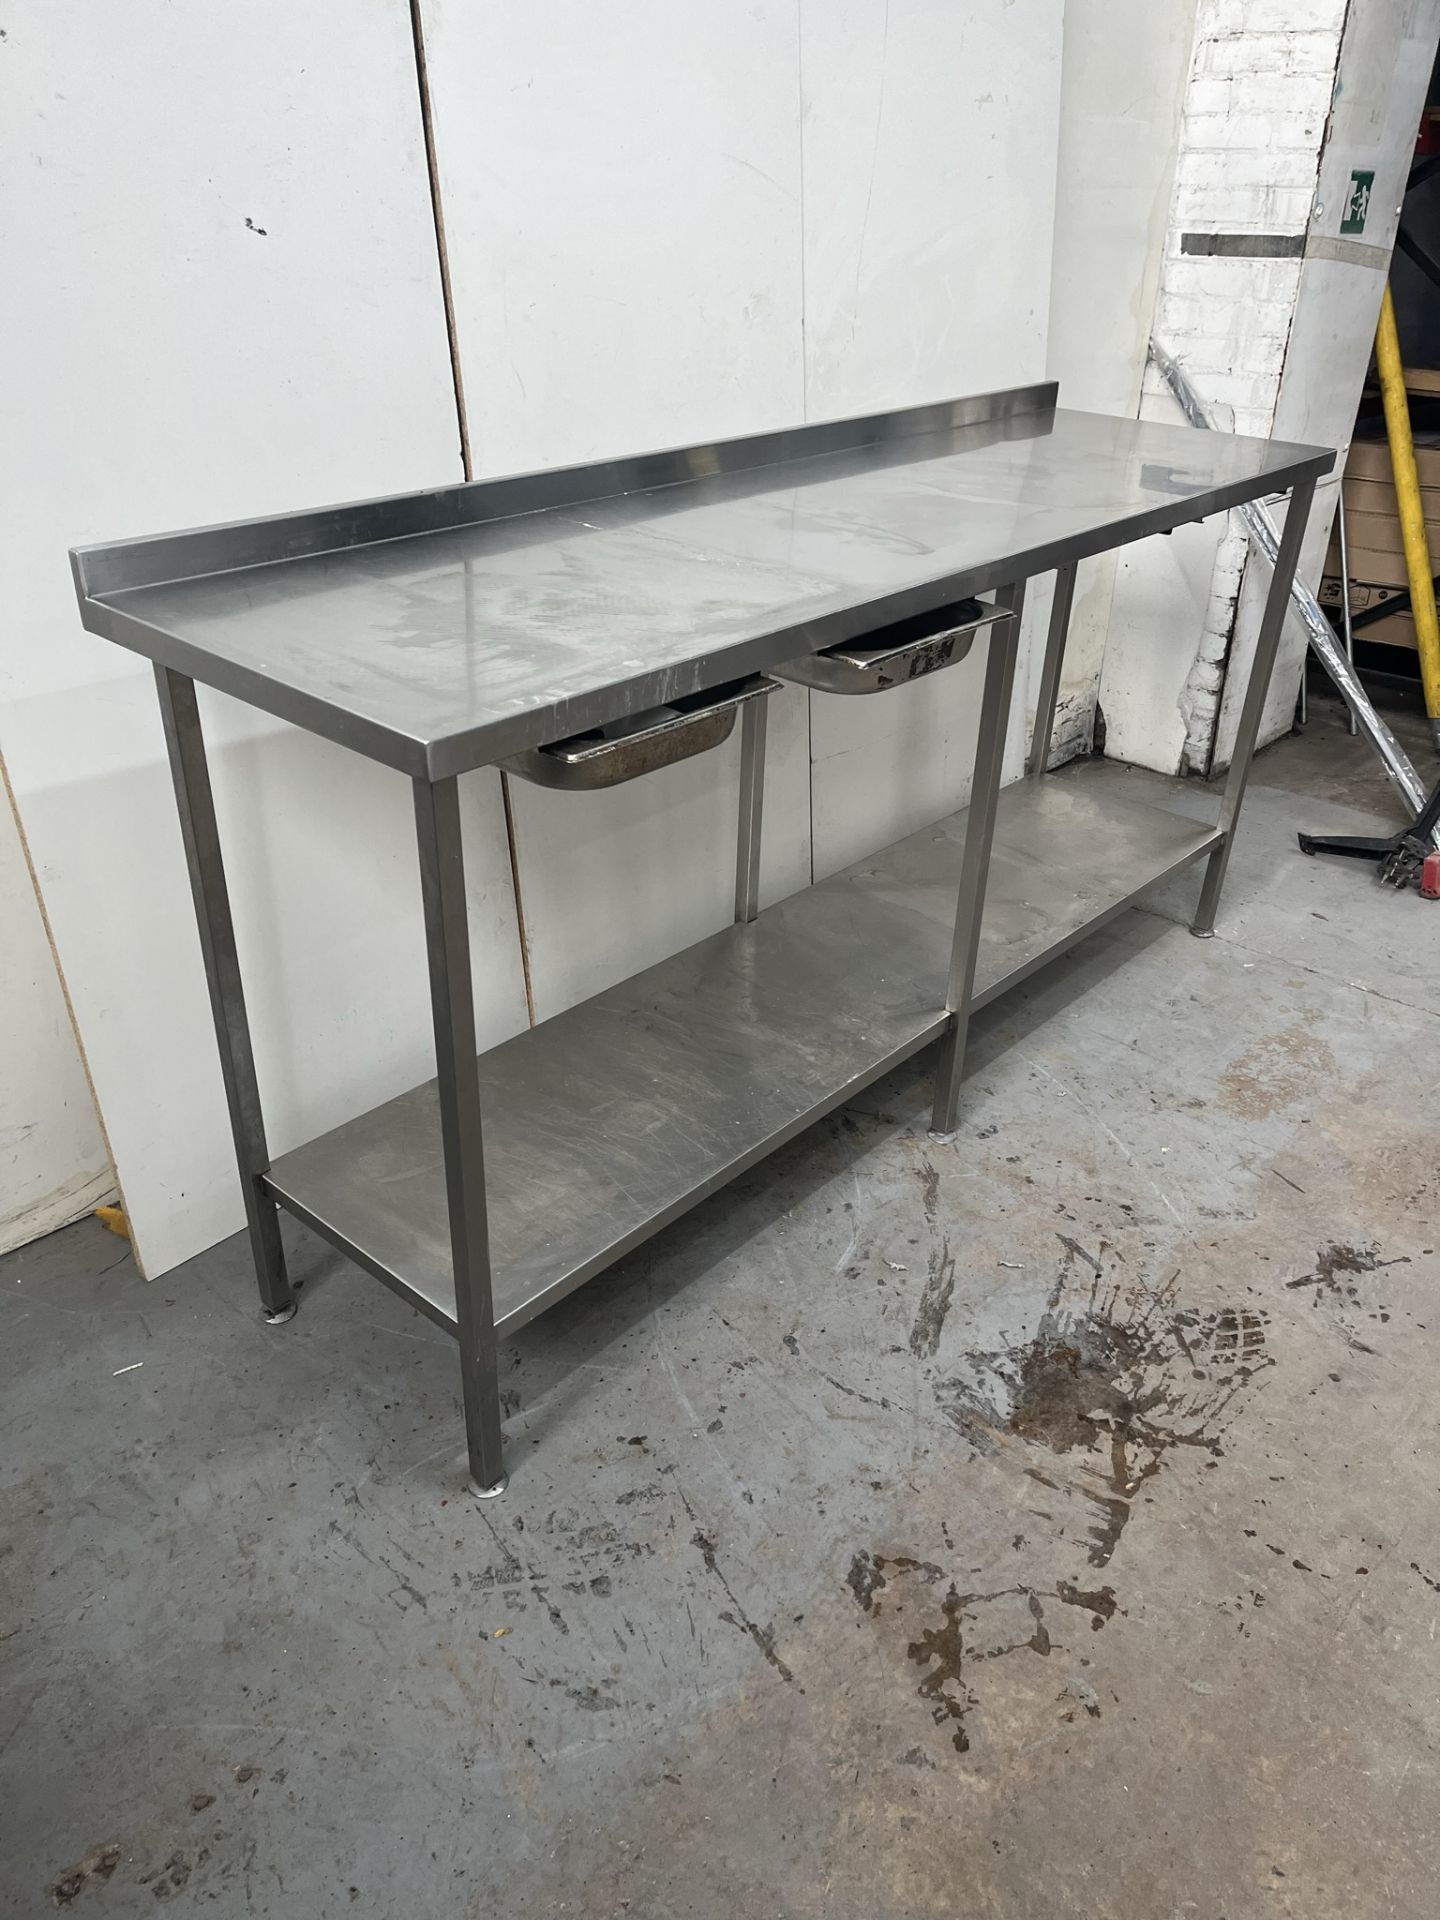 Commercial Stainless Steel Catering Table With Bottom Shelf & Trays - Image 4 of 14